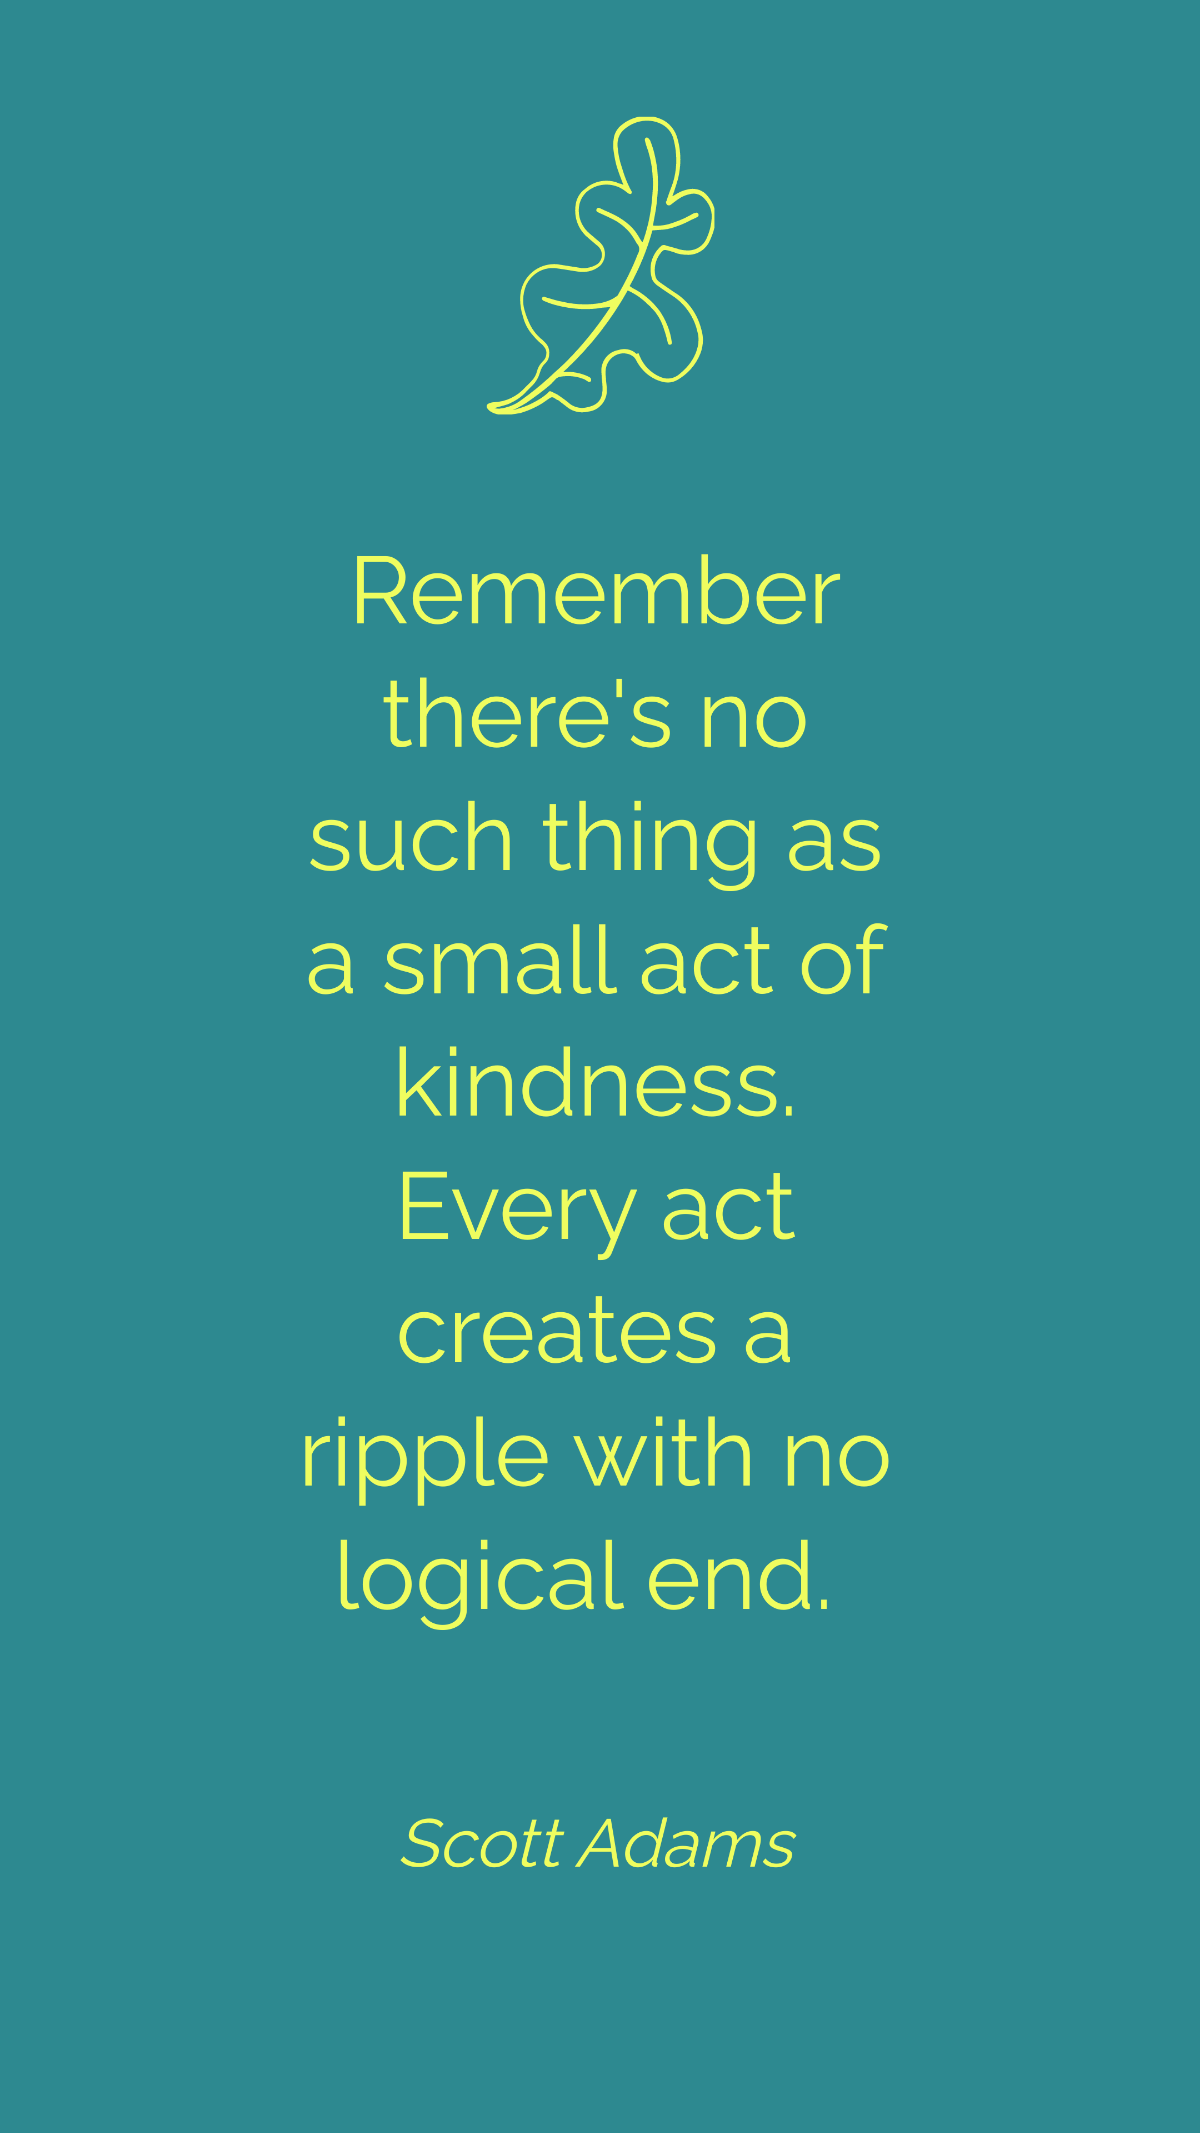 Free Scott Adams - Remember there's no such thing as a small act of kindness. Every act creates a ripple with no logical end.  Template